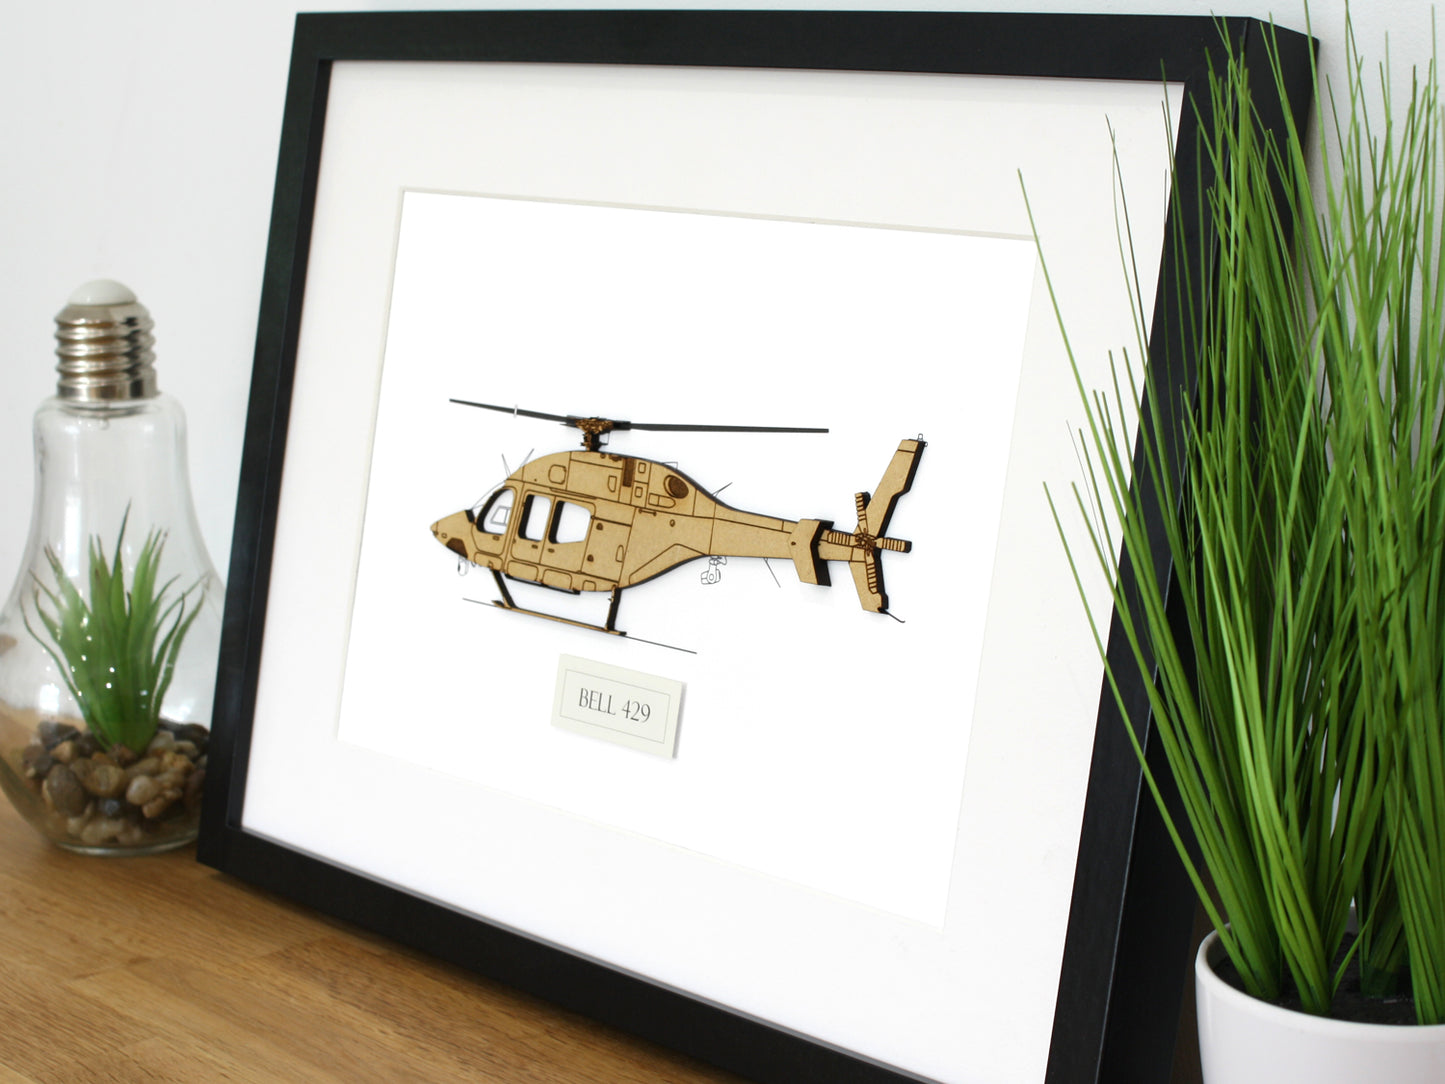 Bell 429 Police helicopter art gift